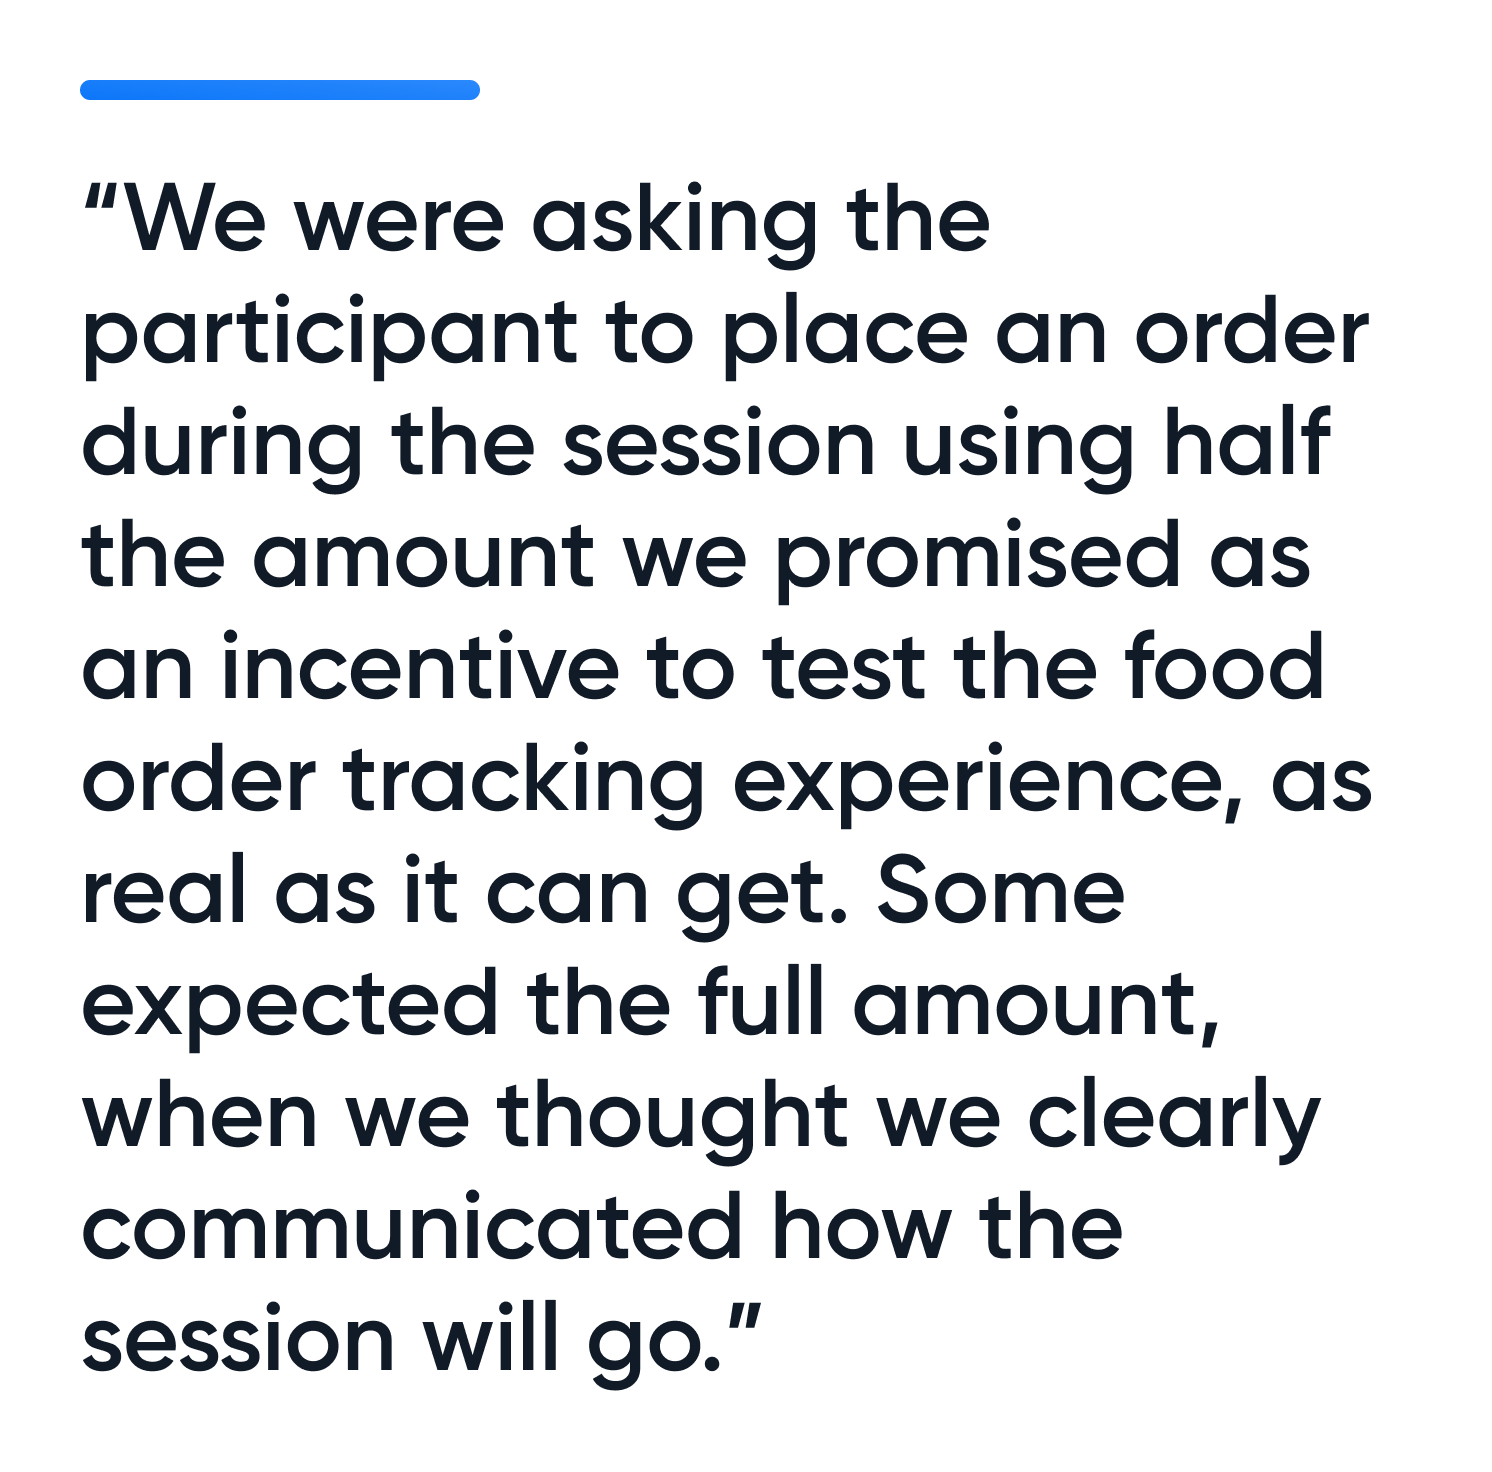 A pull quote that states, "We were asking the participant to place an order during the session using half the amount we promised as an incentive to test the food order tracking experience, as real as it can get. Some expected the full amount, when we thought we clearly communicated how the session will go."